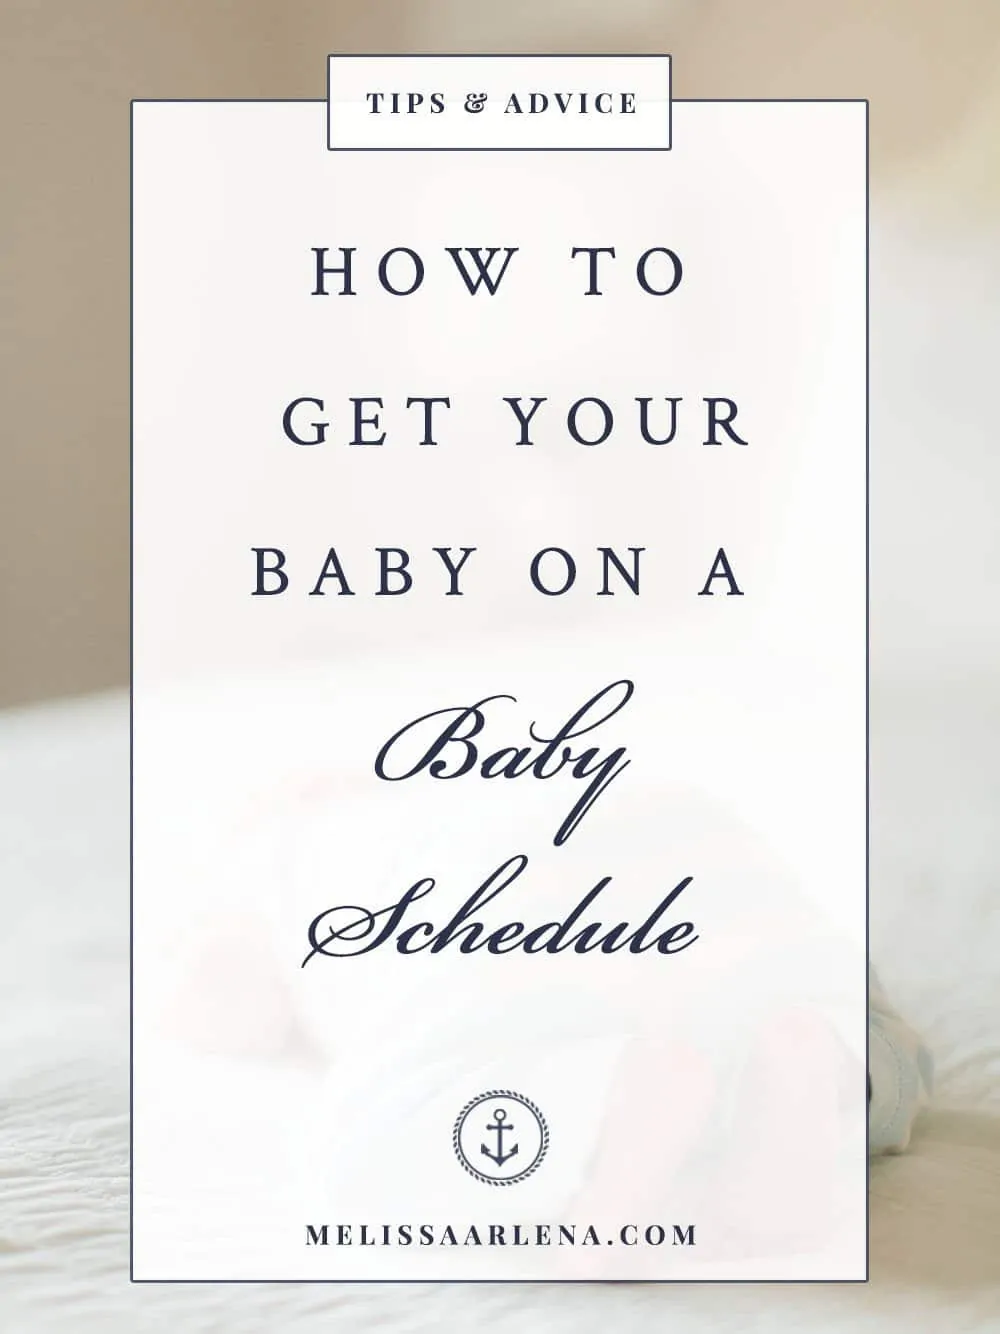 How to Use a Baby Schedule So You Can Get Some Sleep - Melissa Arlena Photography